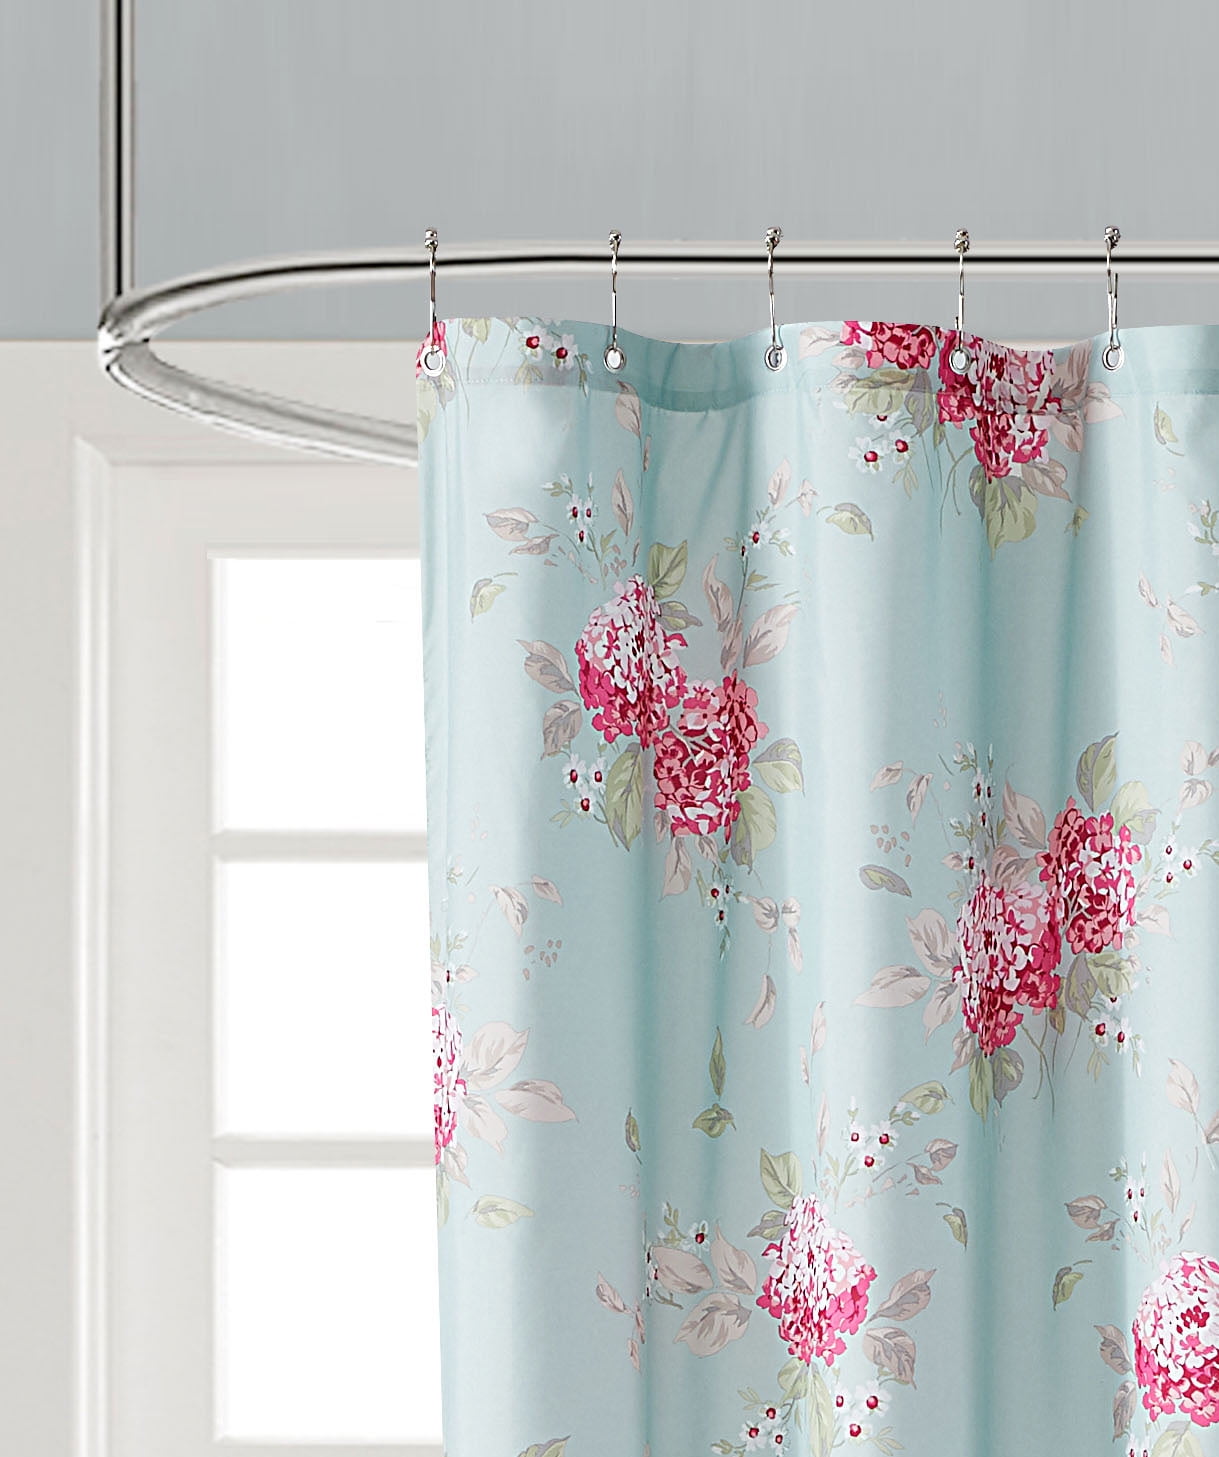 Simply Shabby Chic Misty Rose Printed Shower Curtain, 72 x 72 